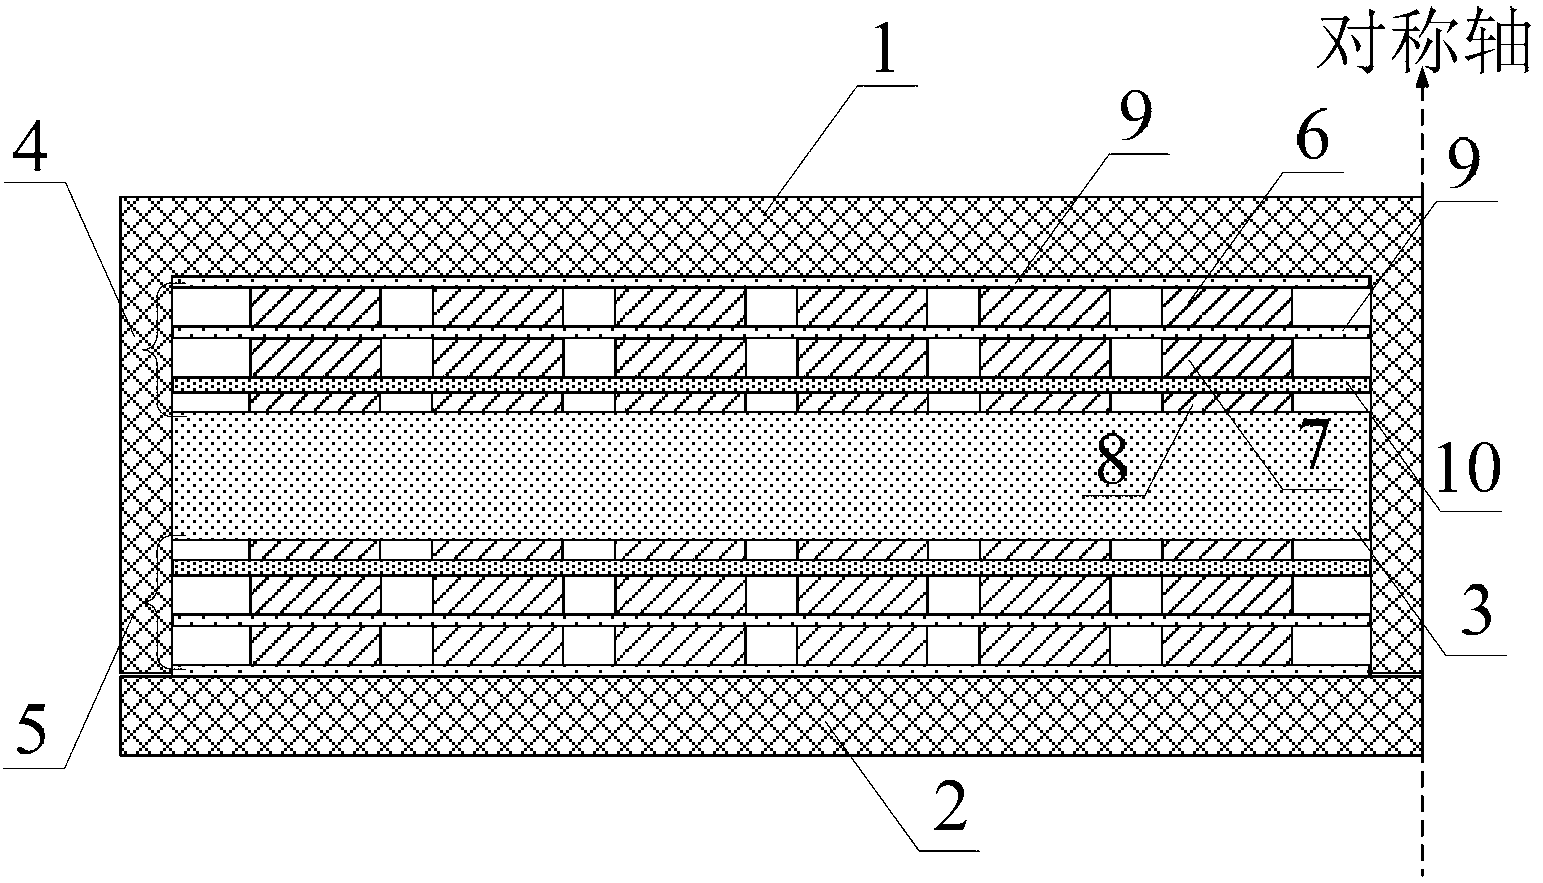 Integrated EMI (electromagnetic interference) filter for optimizing grounded winding layout to improve noise suppression performance